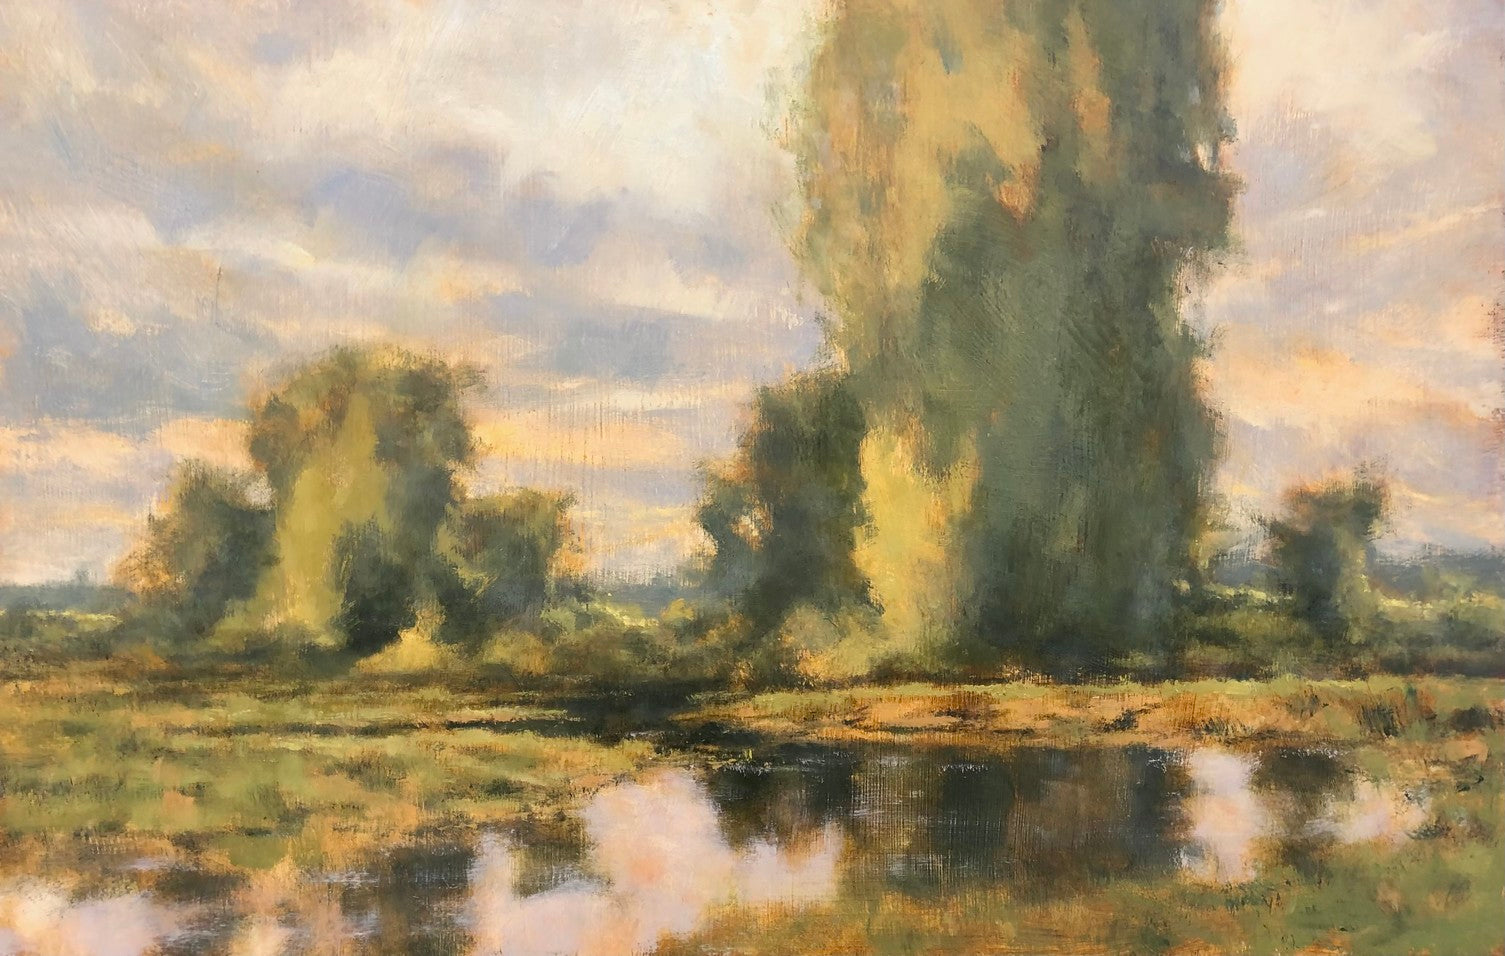 Landscape painting by artist Clint Bova. Landscape focuses on two stands of sycamore trees with a still body of water in front of them. The colors are greens, yellows, and blues. Style is classic, barbizon school 